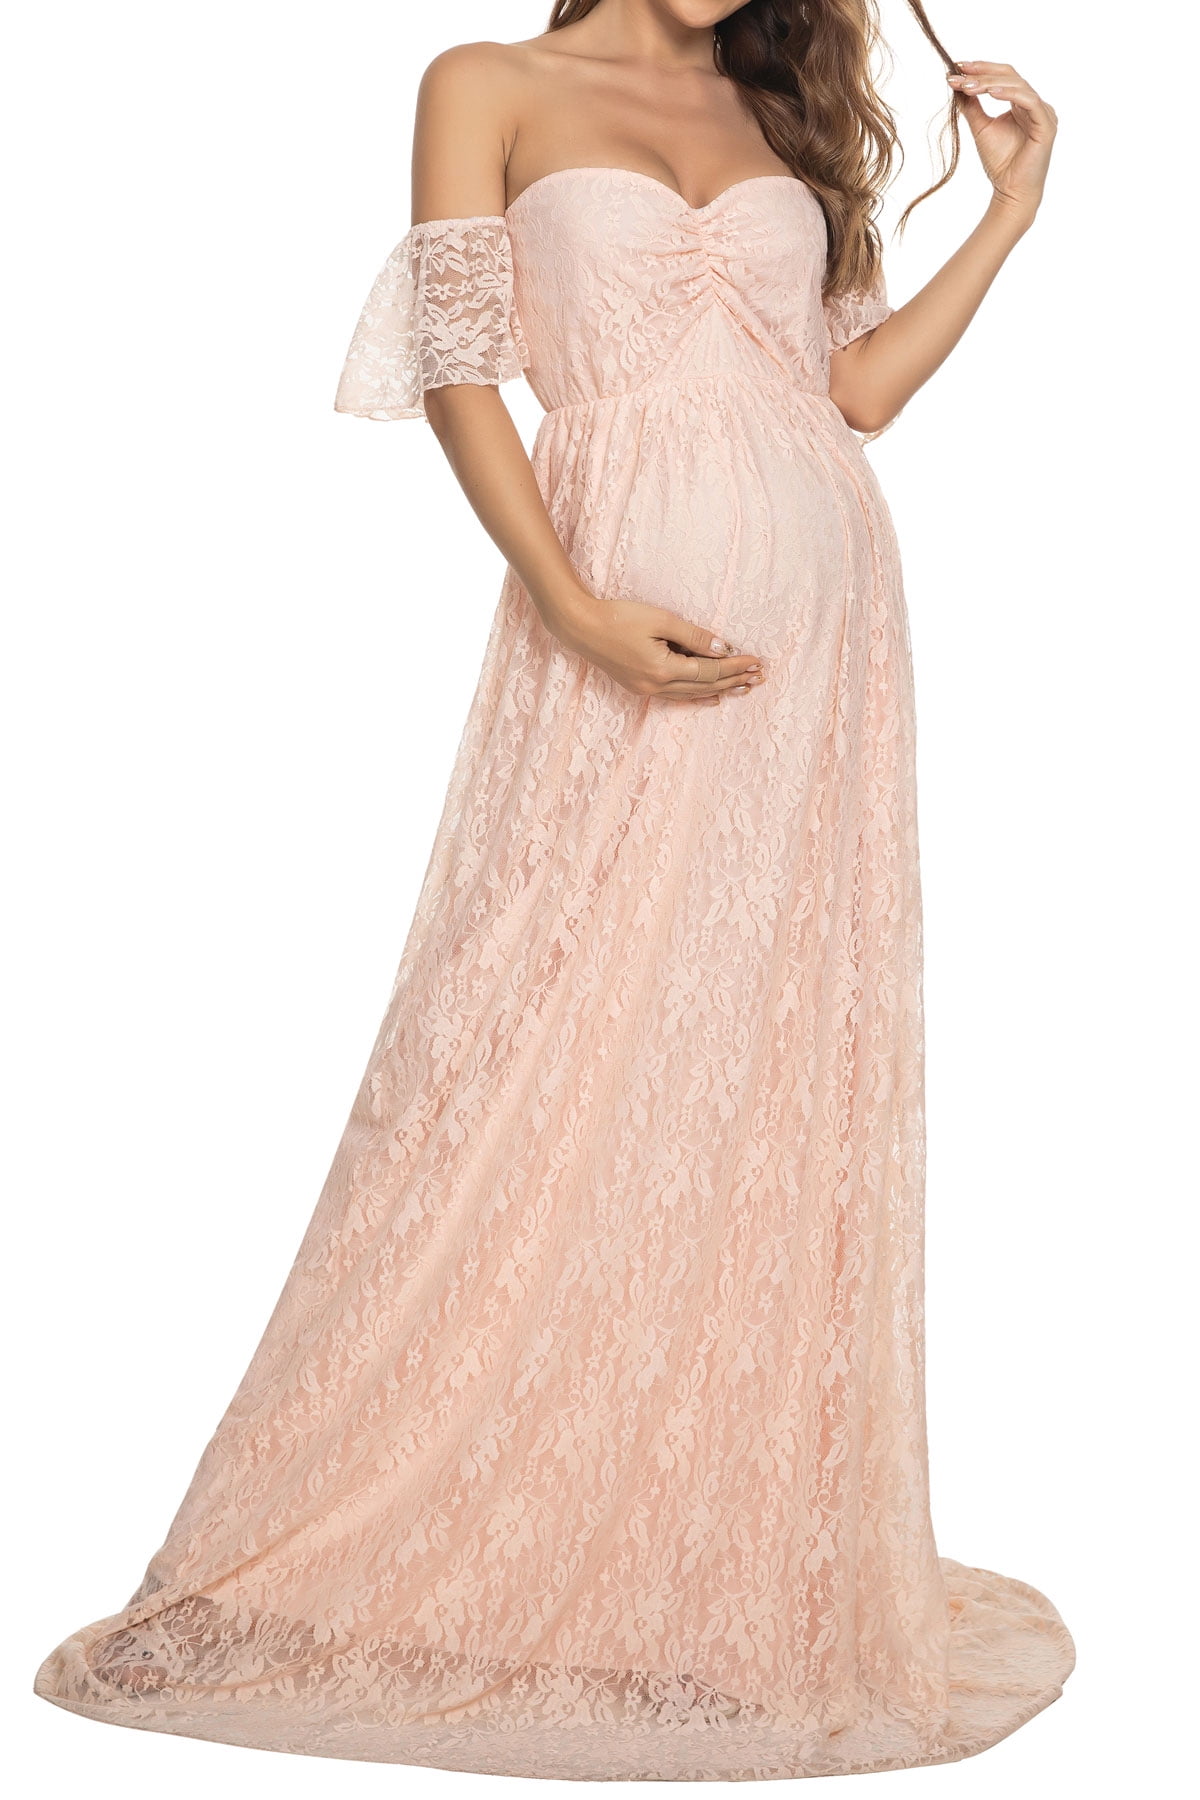 Maternity-Lace-dress-for-Wedding-Evening-Formal-Party  special occasion dress 